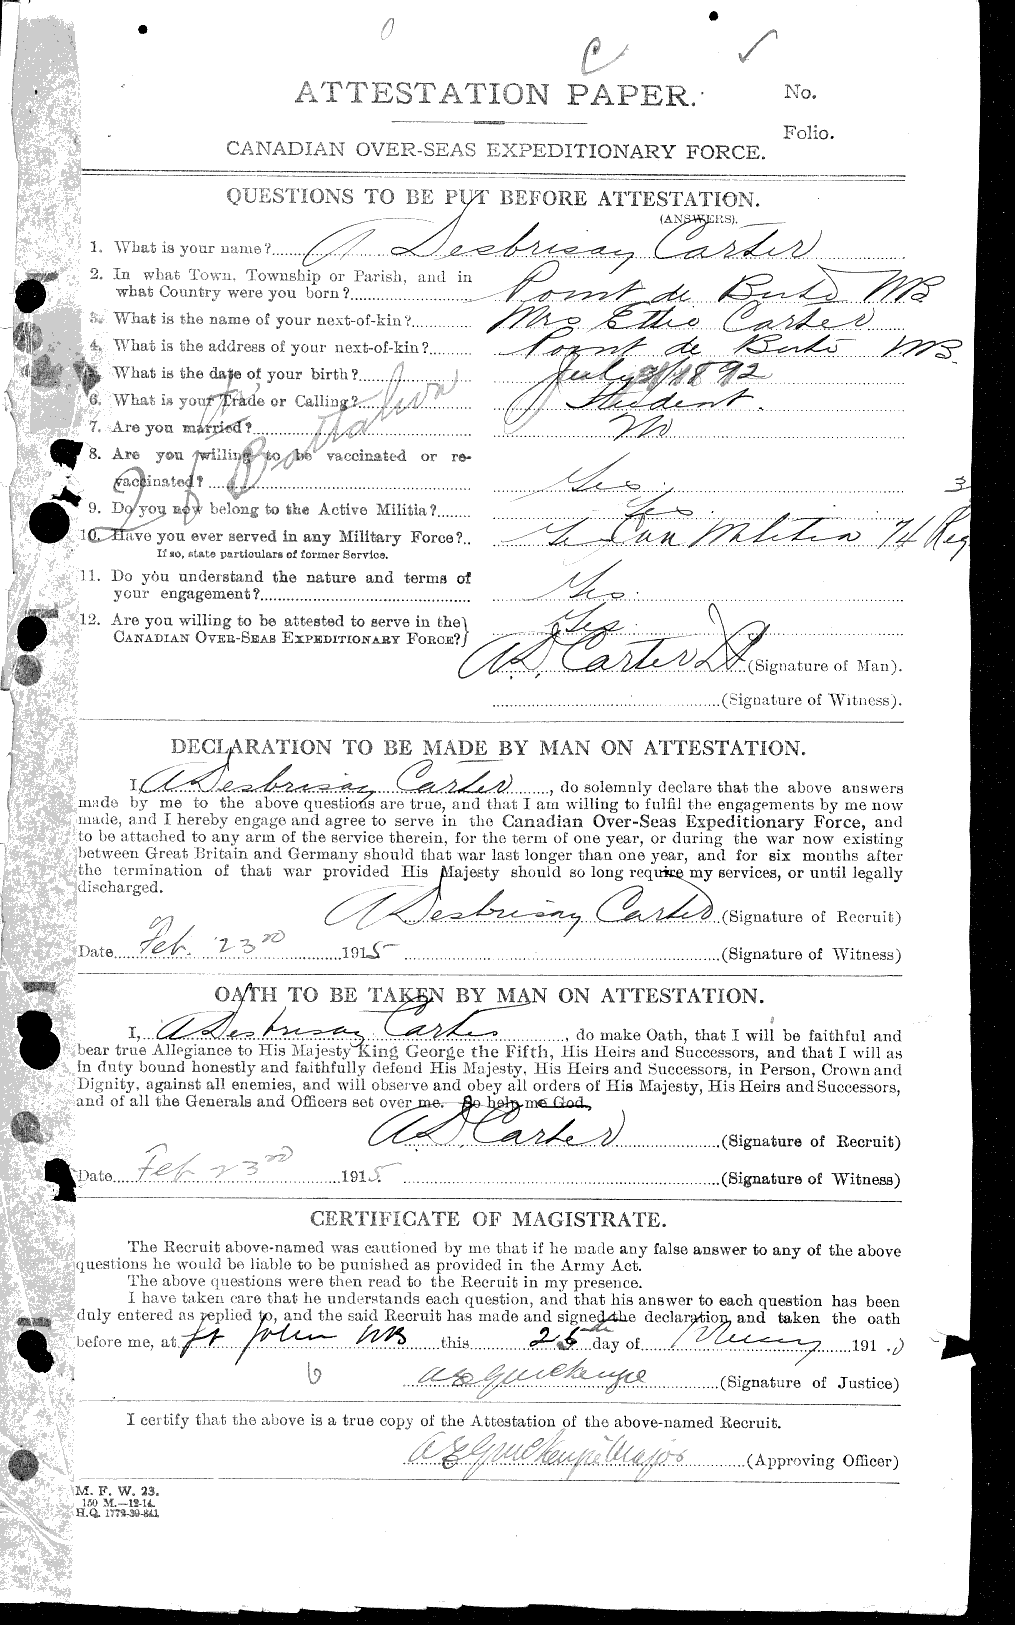 Personnel Records of the First World War - CEF 010898a